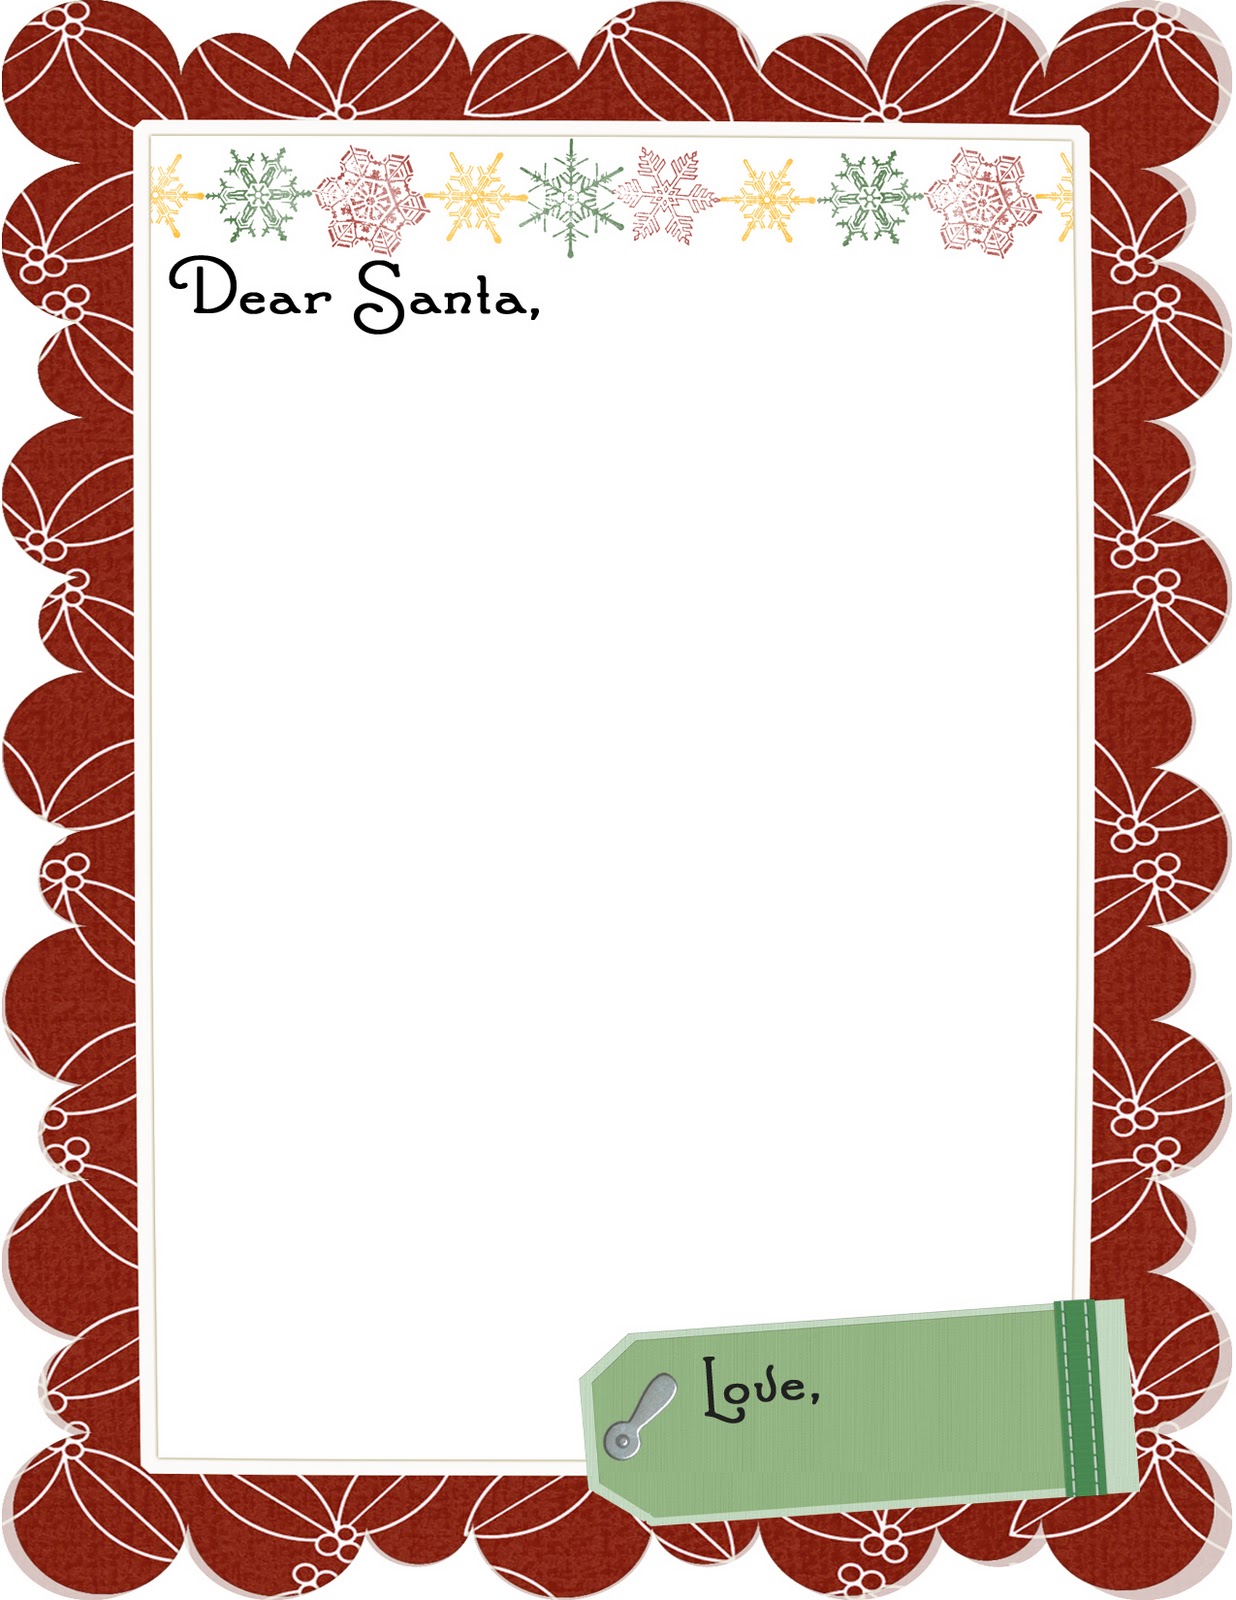 Free Border Templates For Word Documents - ClipArt Best